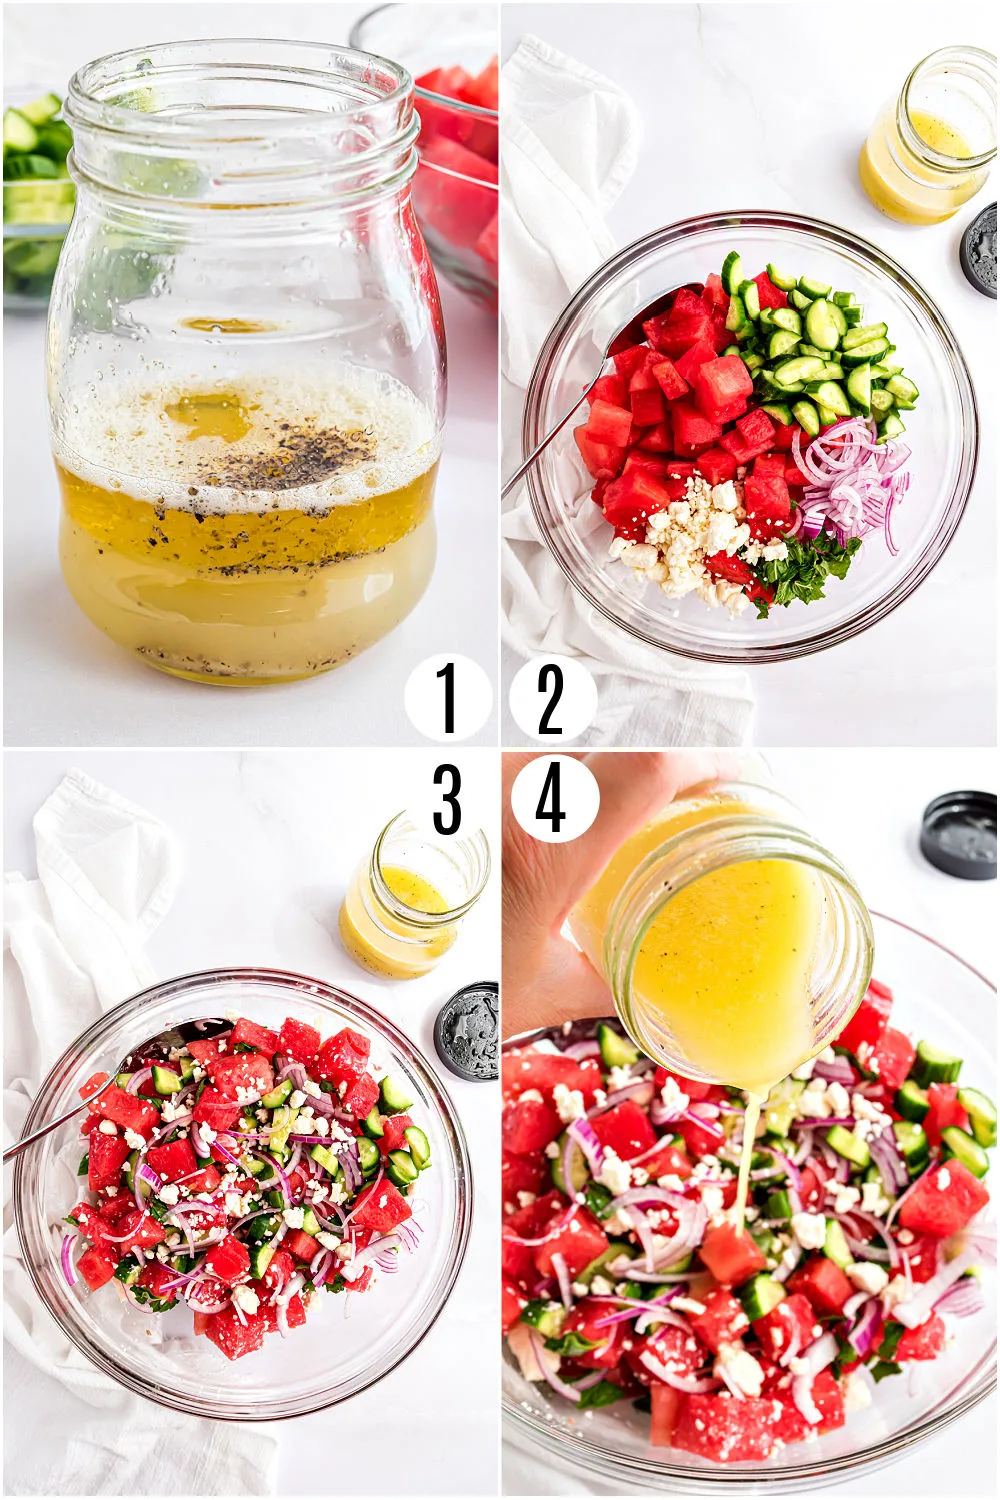 Step by step photos showing how to make watermelon feta salad.